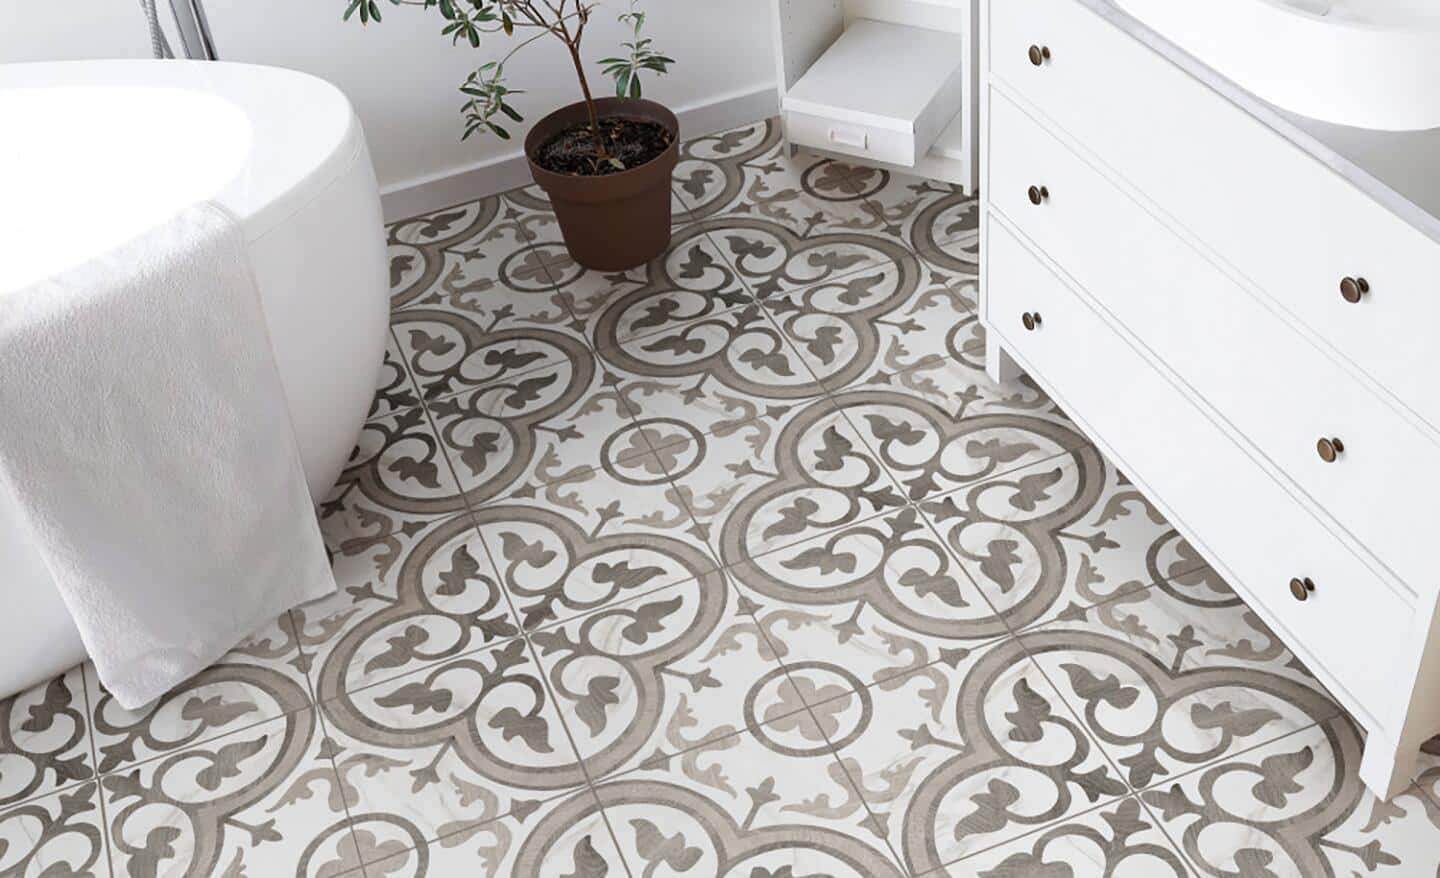 Patterned vinyl flooring installed in a small bath.